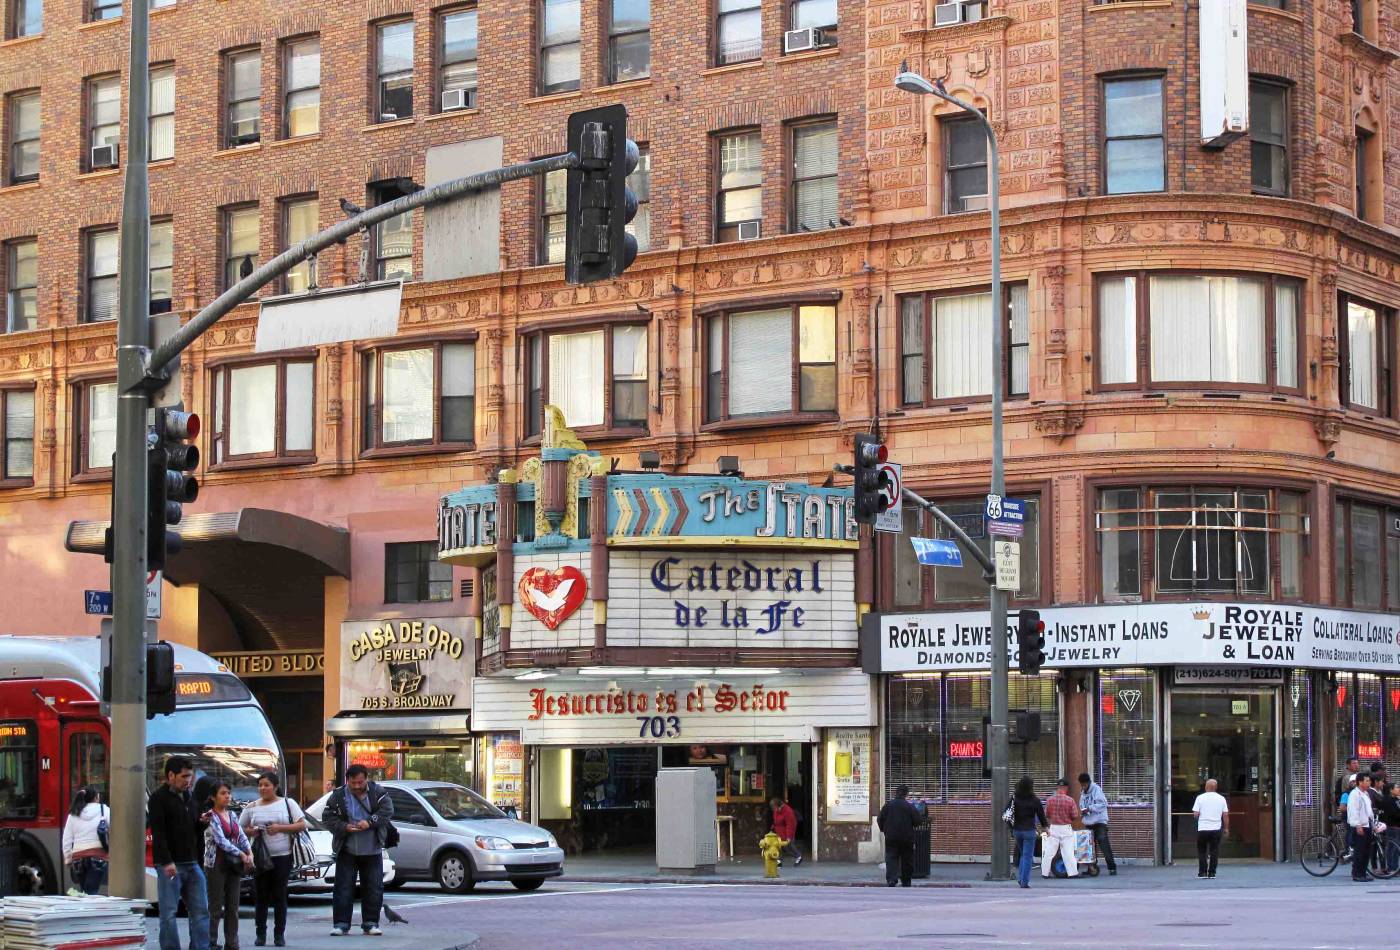 For the renovation of this historic theater, our design approach focused on the re-use of the space for bar and/or restaurant use. Renovation work included a facade study, a conditional use permit plan, a schematic-design plan and a feasibility study.